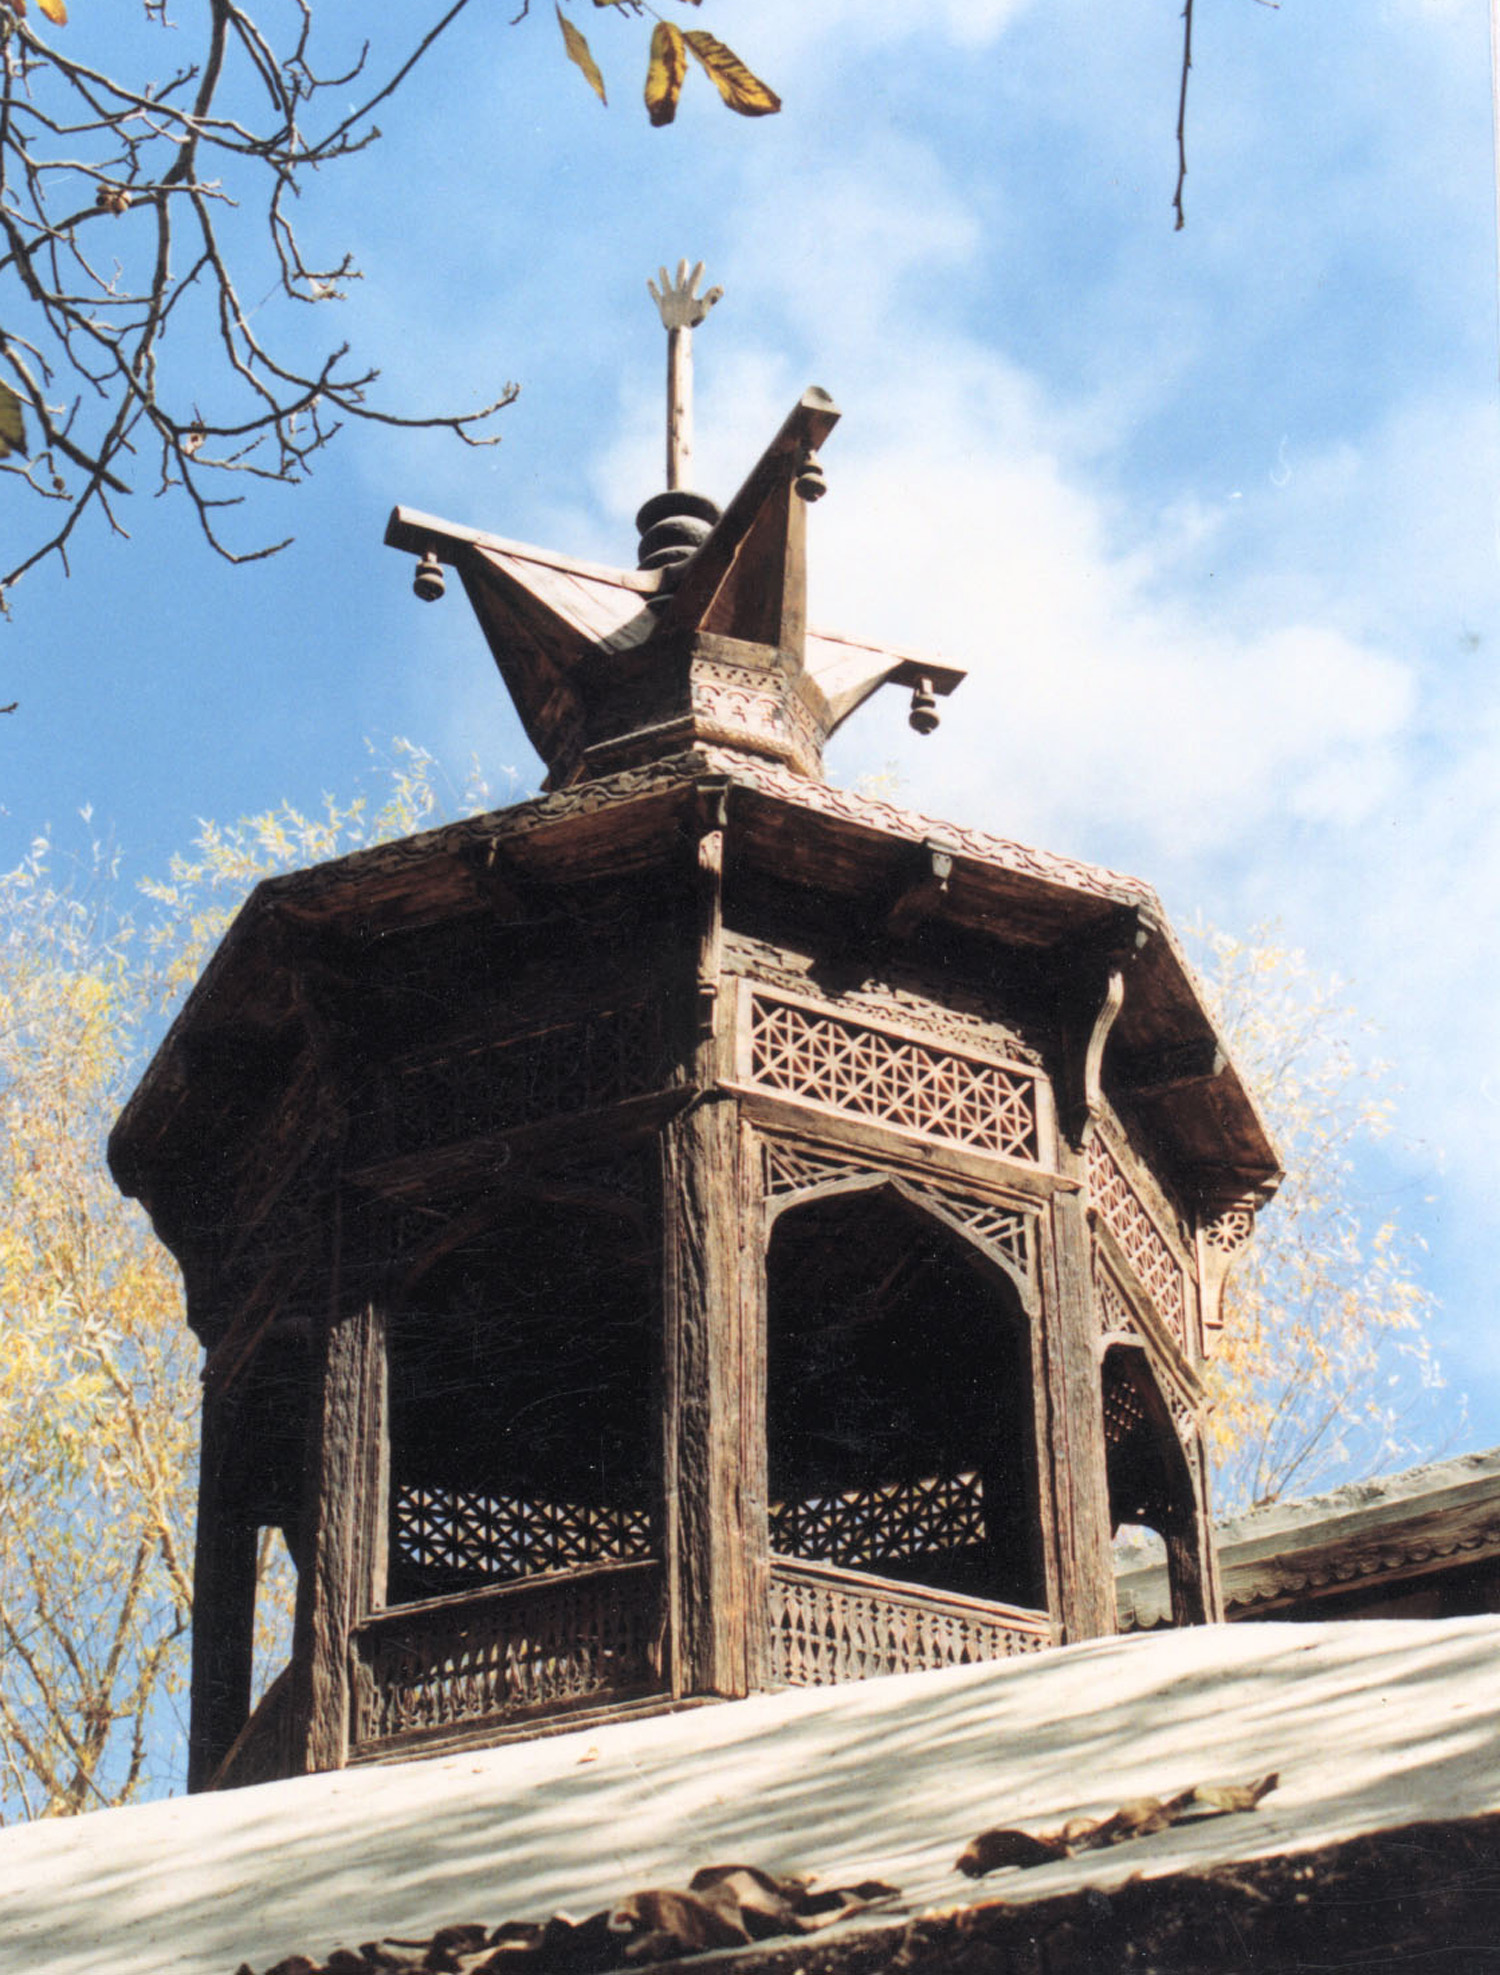 Astana Syed Mir Muhammad Restoration - The roof top tower after restoration